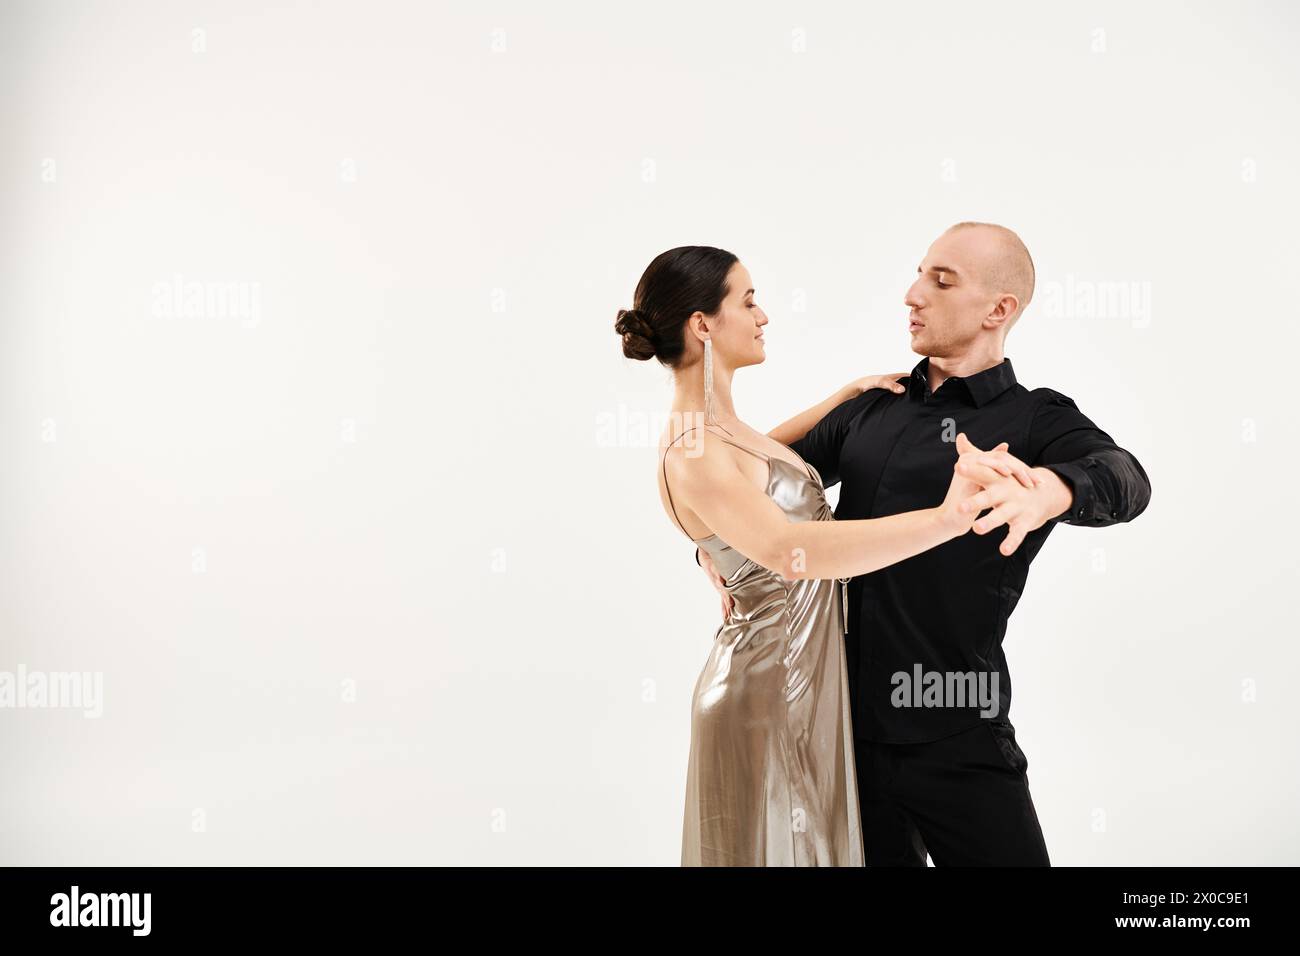 A young man in black attire and a young woman in a shiny dress dance fluidly. Stock Photo